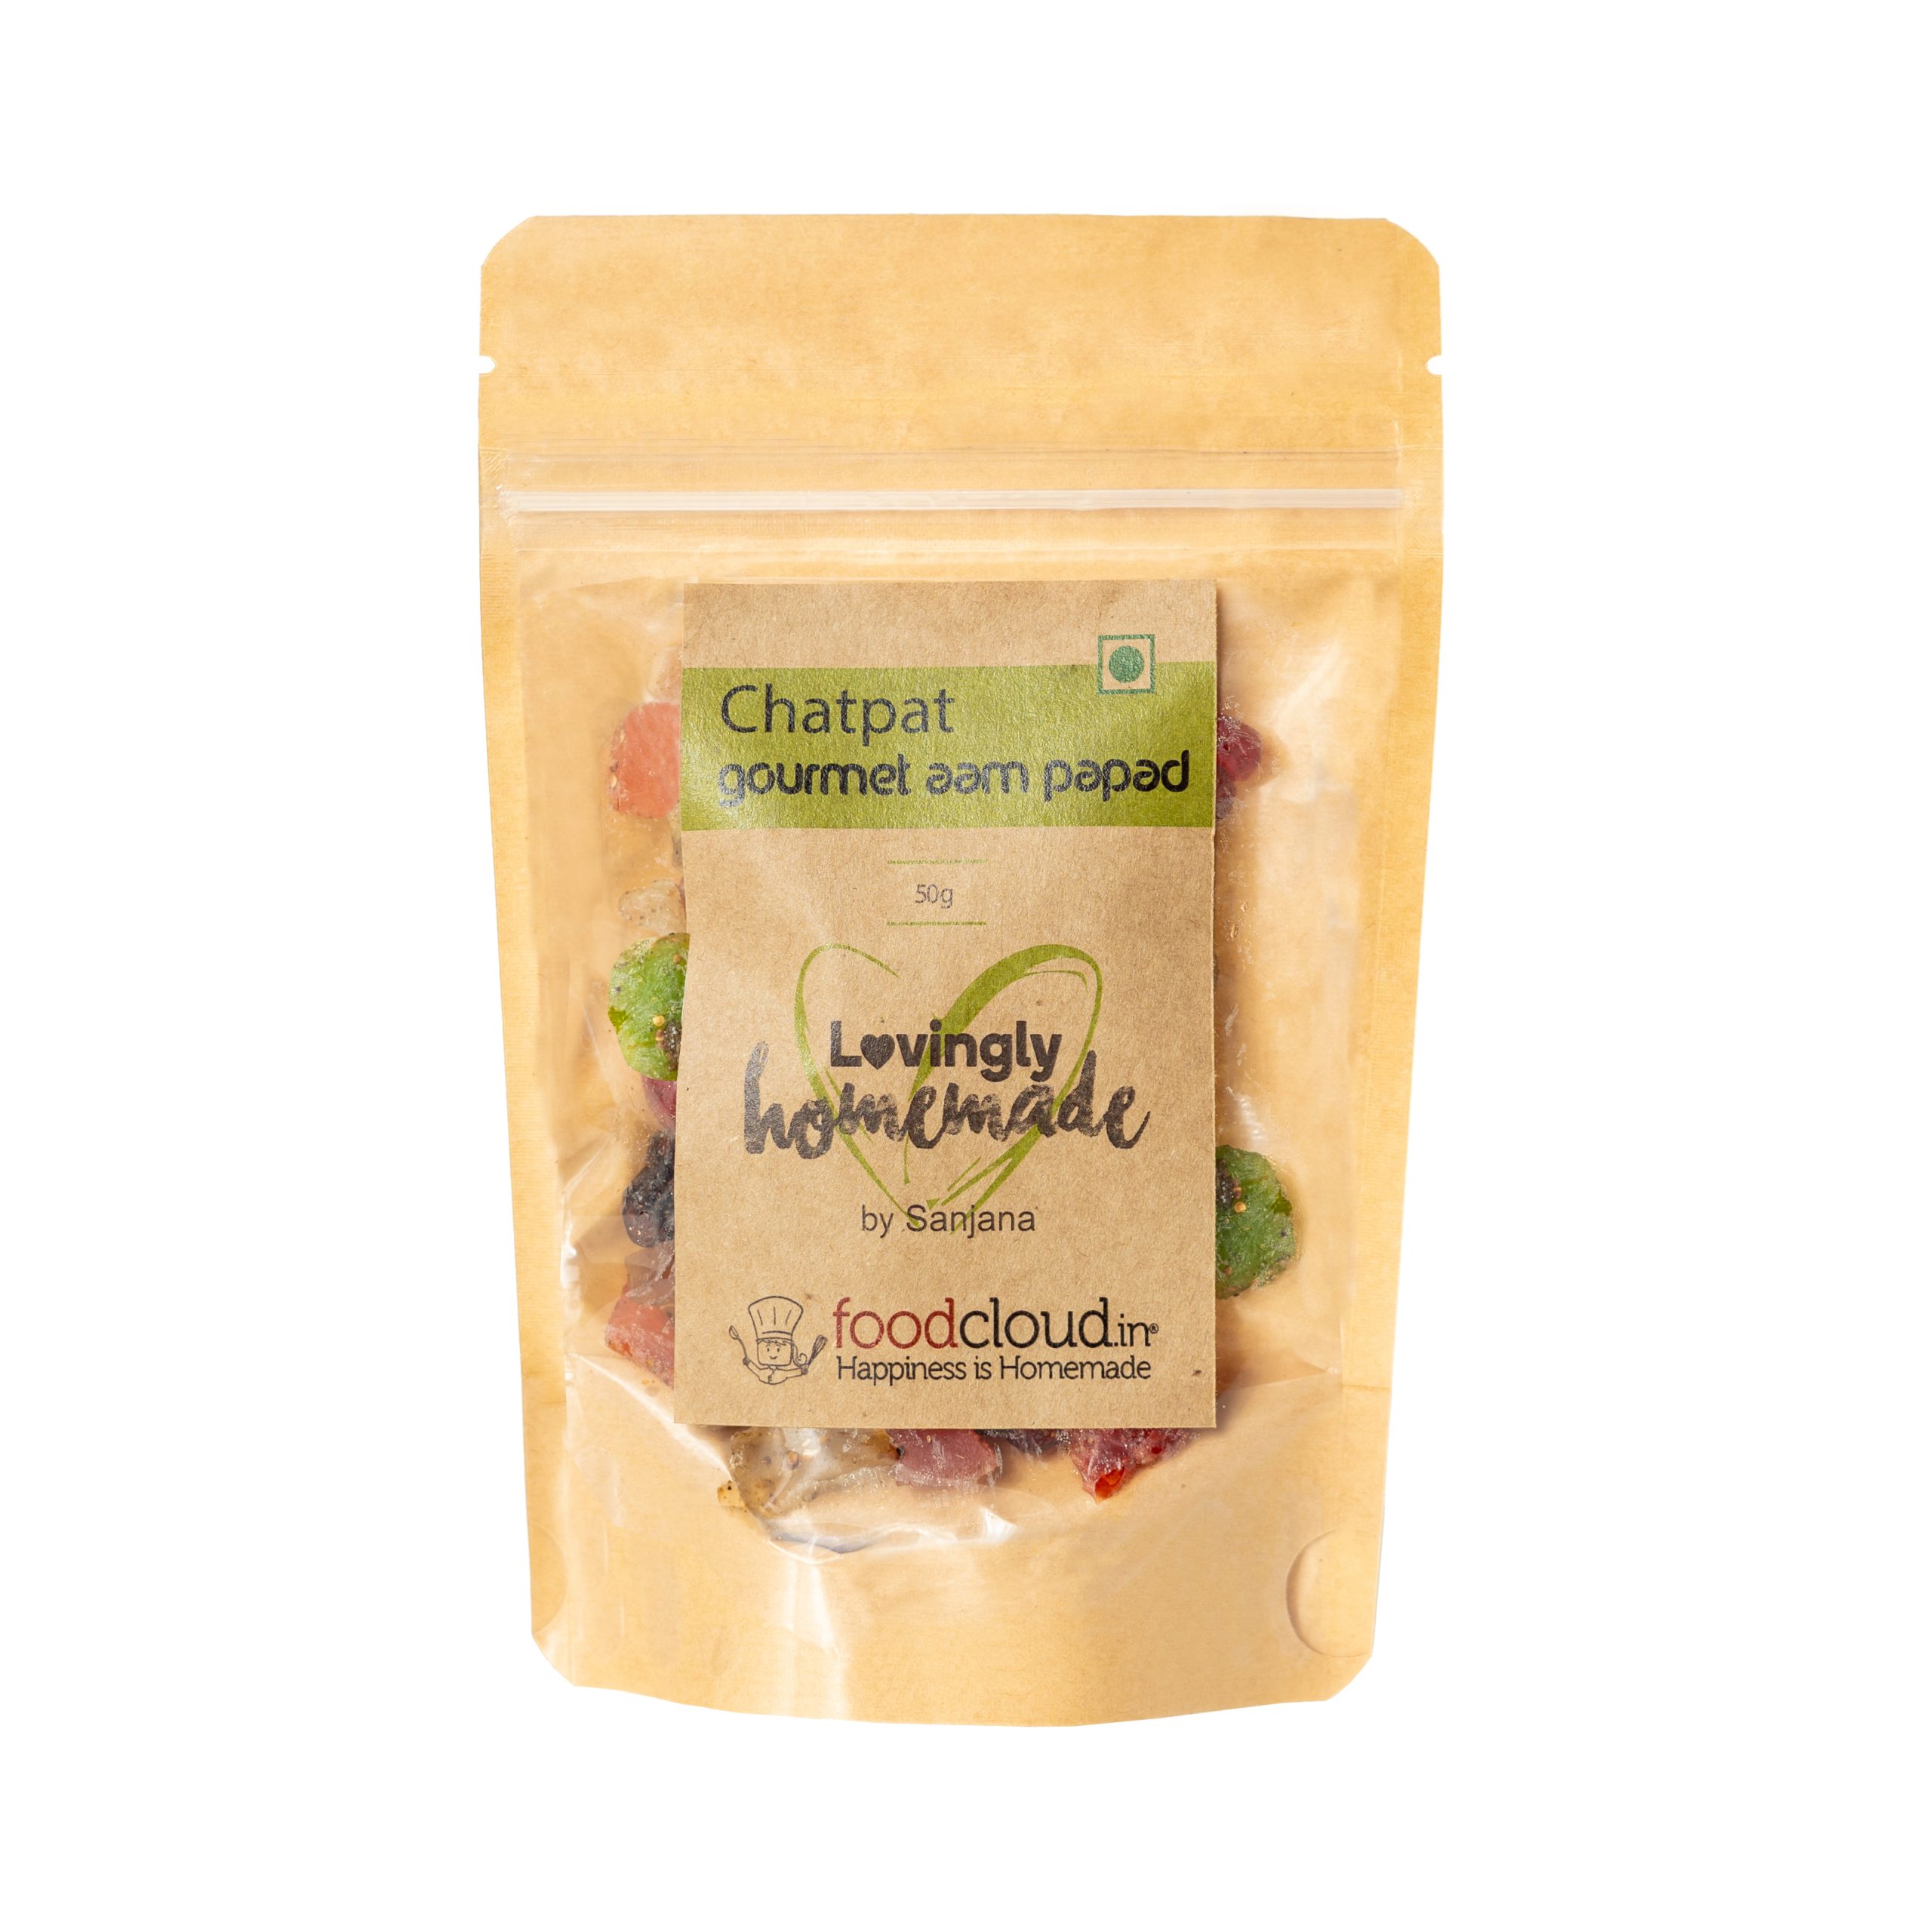 Product: FoodCloud Chatpat Gourmet Aampapad (Pack of 3)